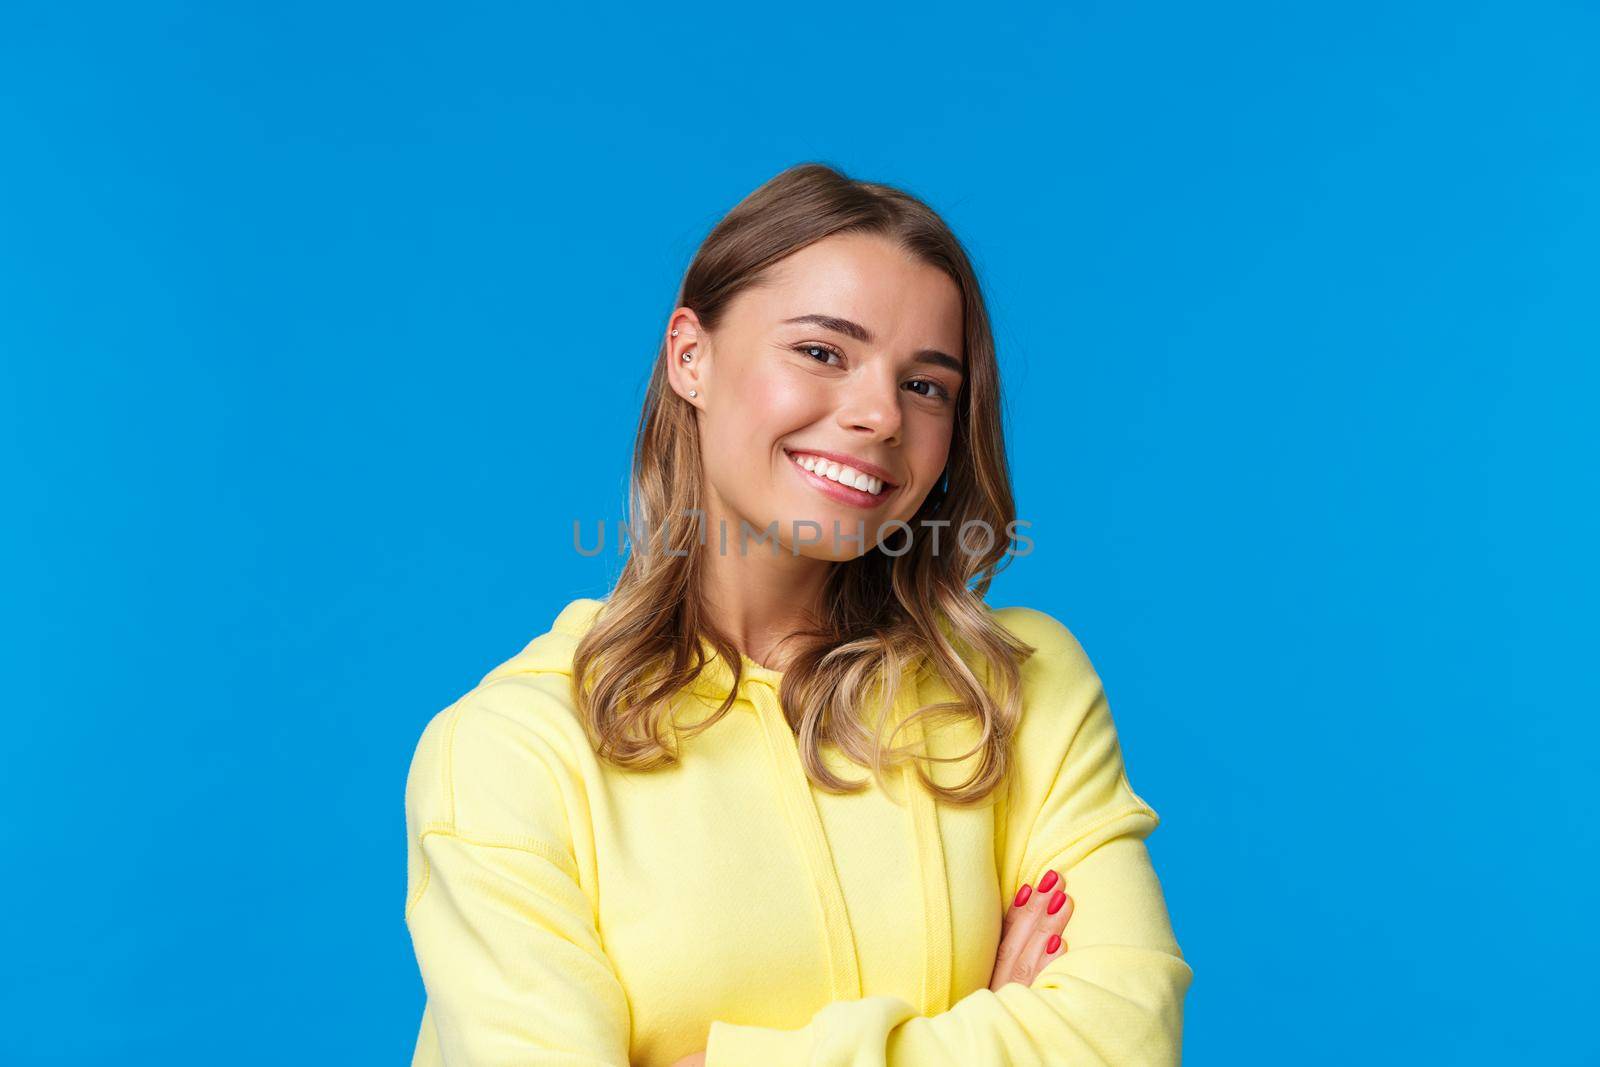 Close-up portrait of confident good-looking young blond girl with pierced ear, cross hands chest in professional self-assured pose, smiling enthusiastic, ready for job, blue background.